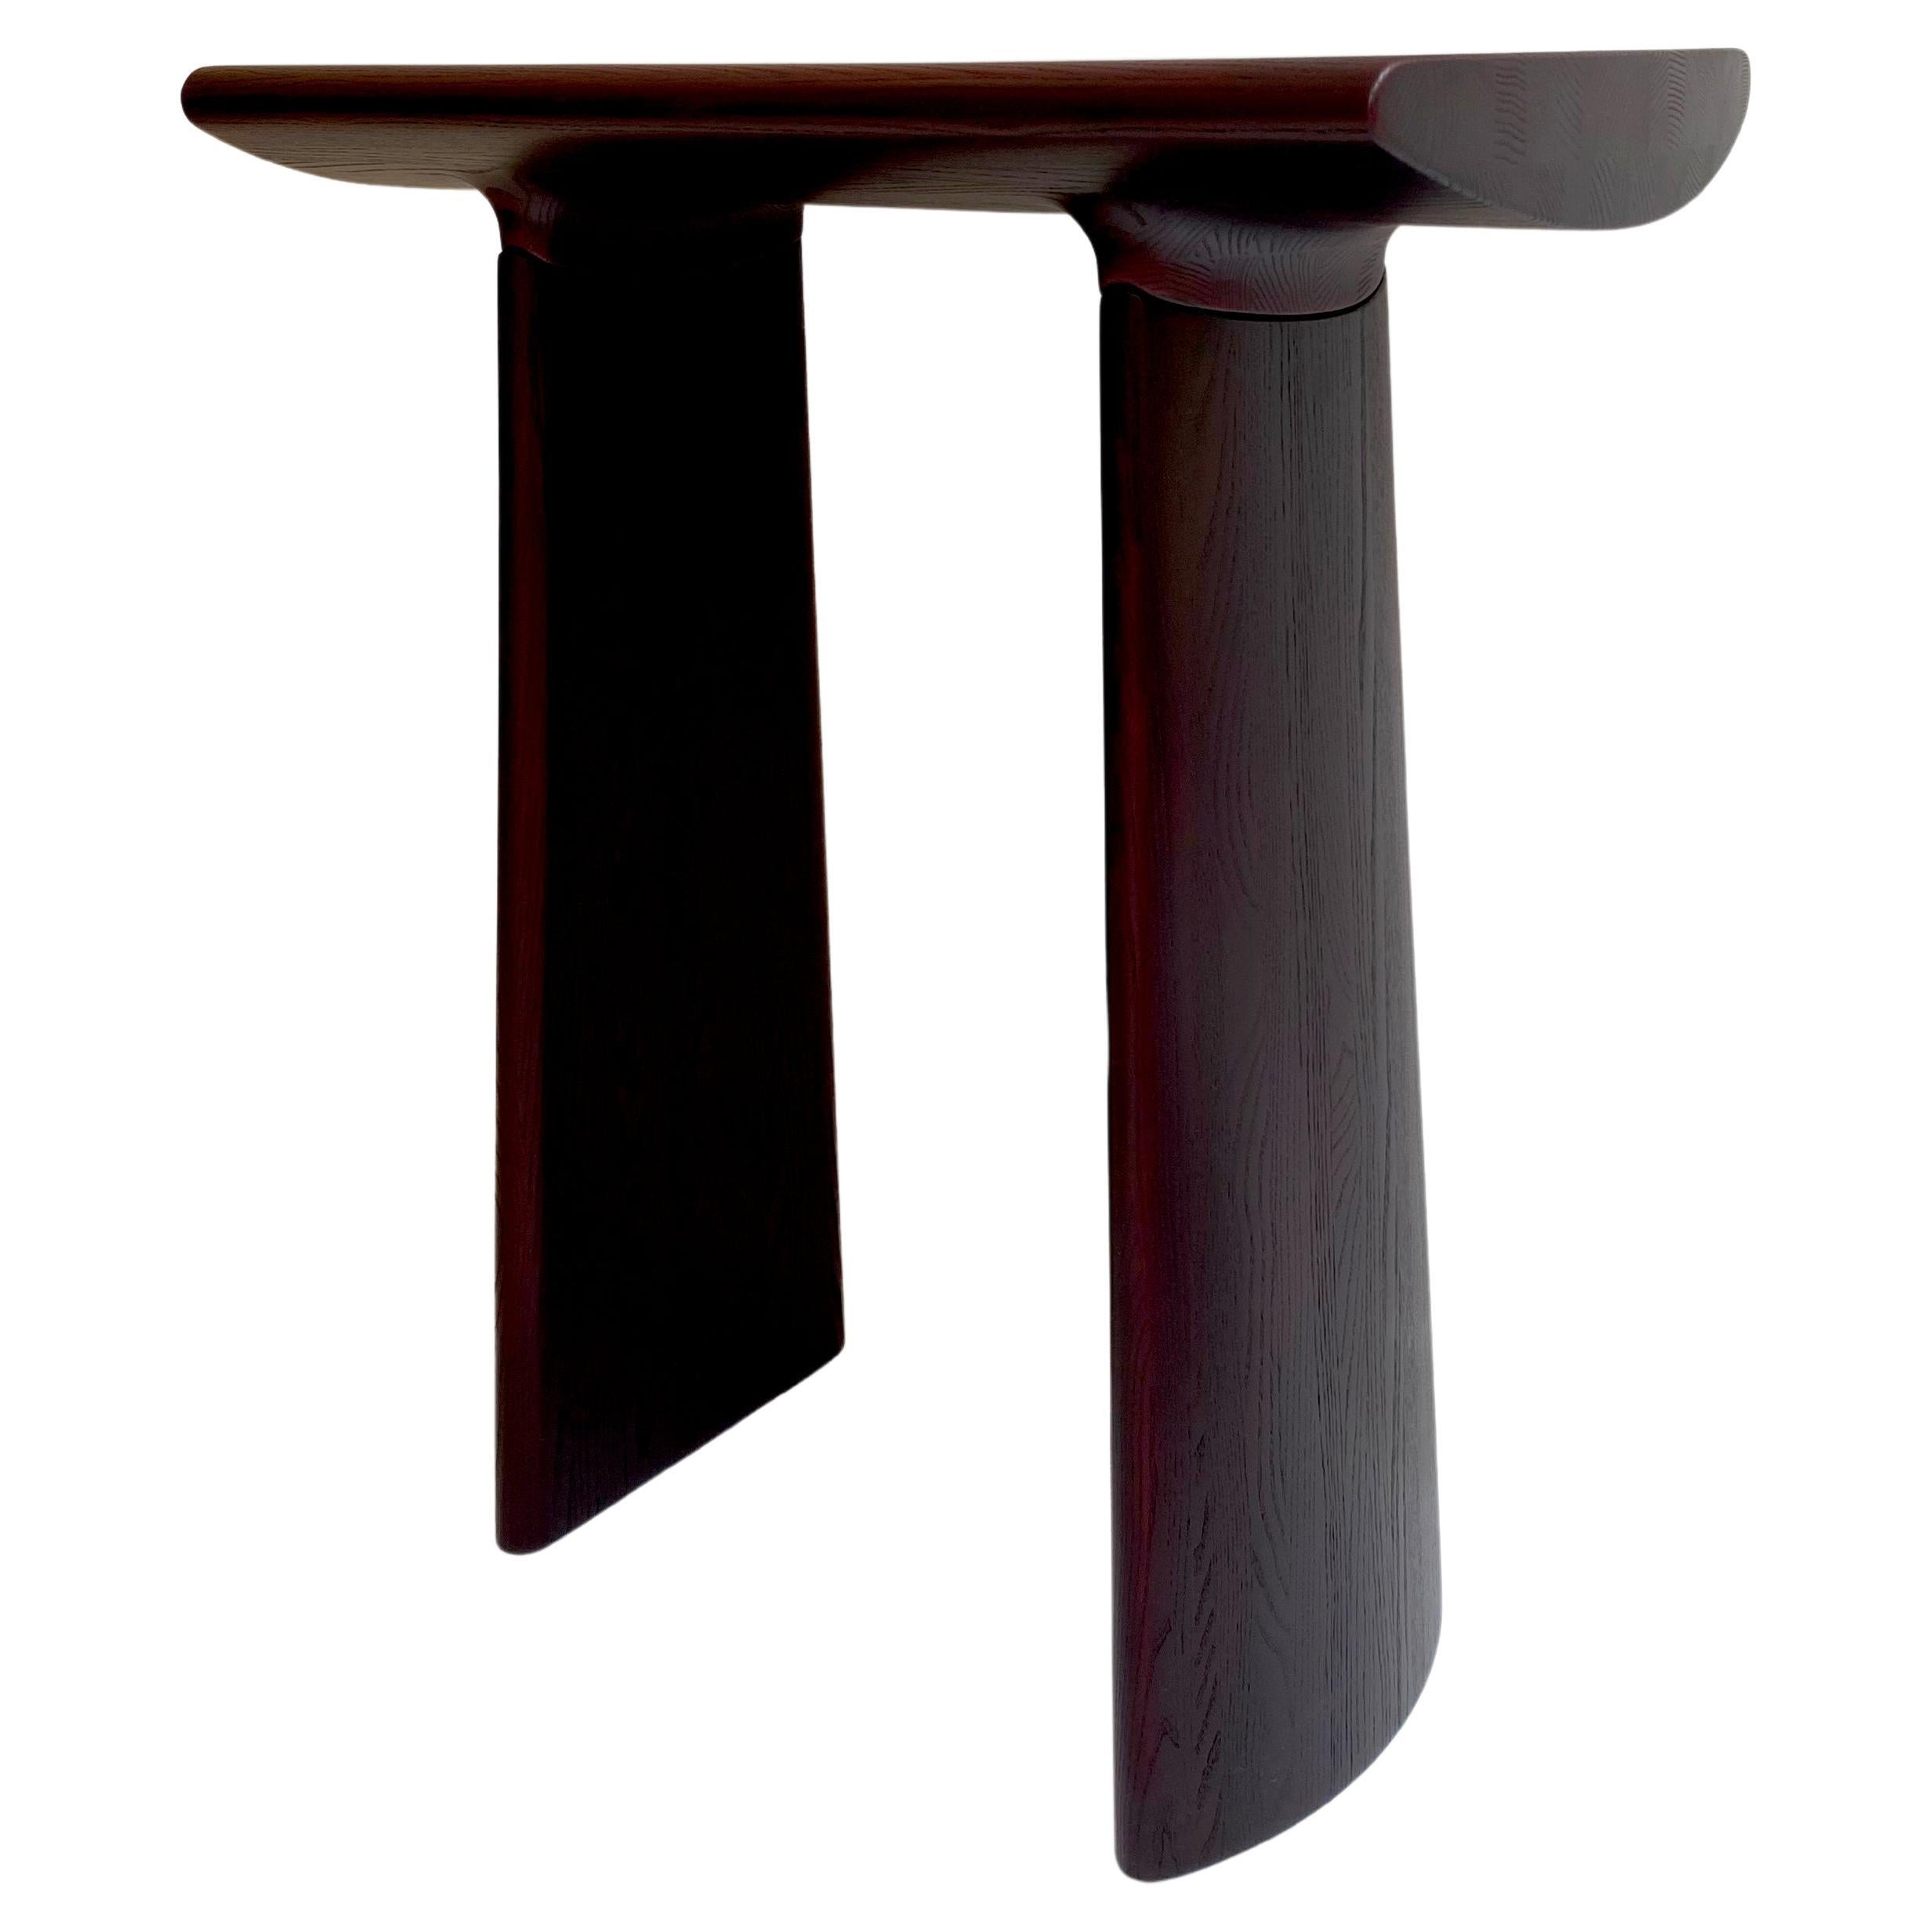 Black Grape Stained Ash Daiku Console 120 by Victoria Magniant For Sale